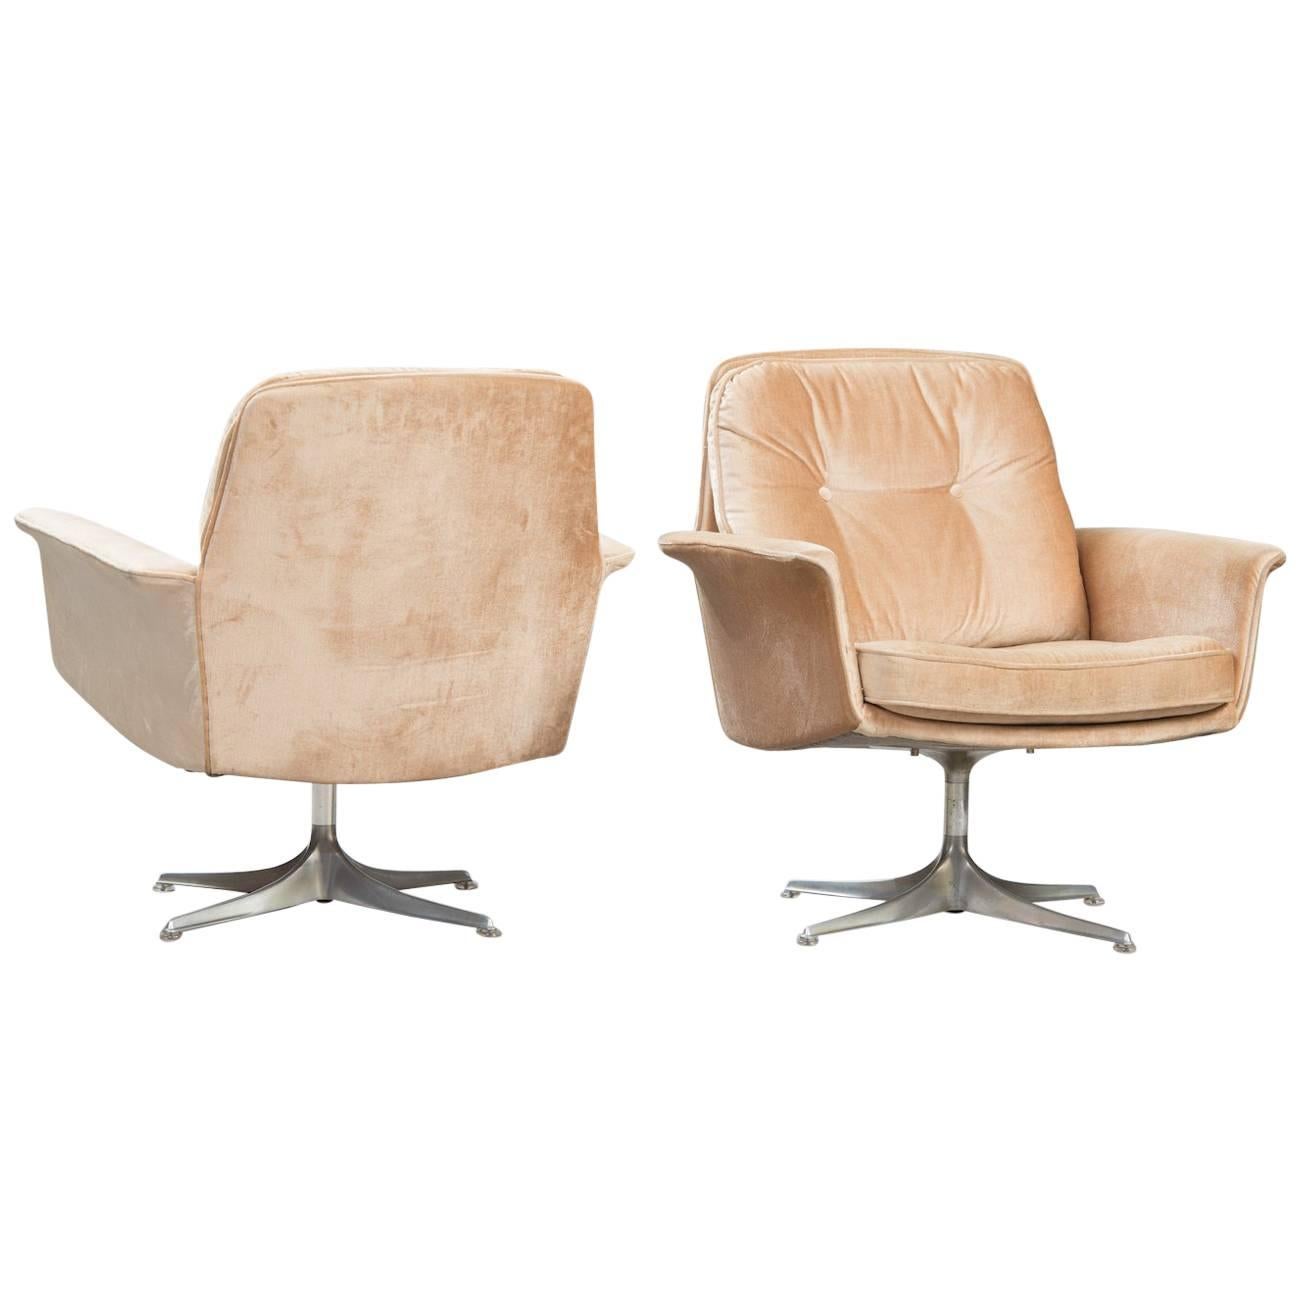 Set of Two Horst Bruning Swivel Lounge Chairs for COR